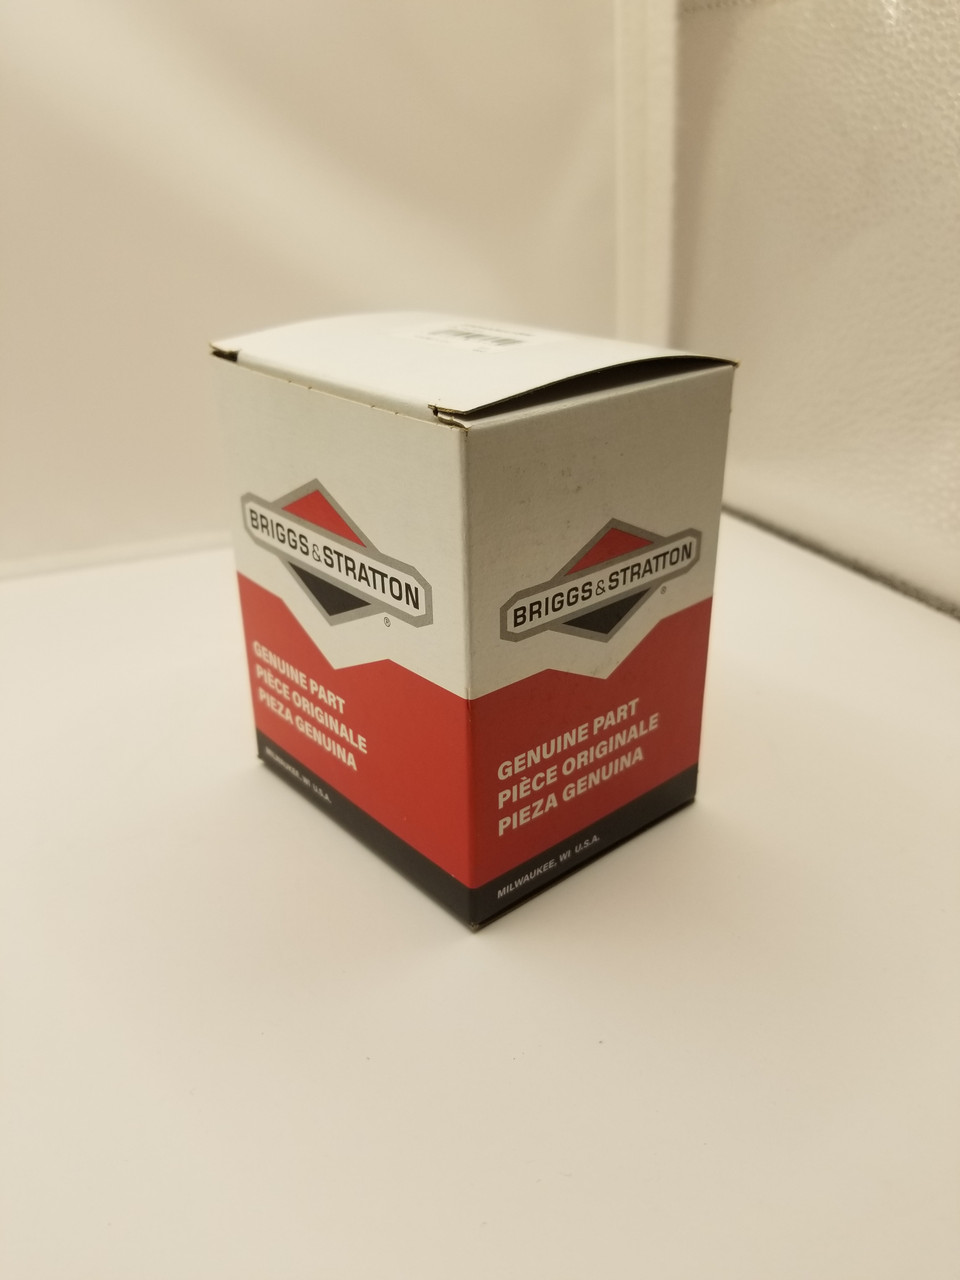 ENGINE PACKED SINGLE CARTON - 40T876-0010-G1 package std